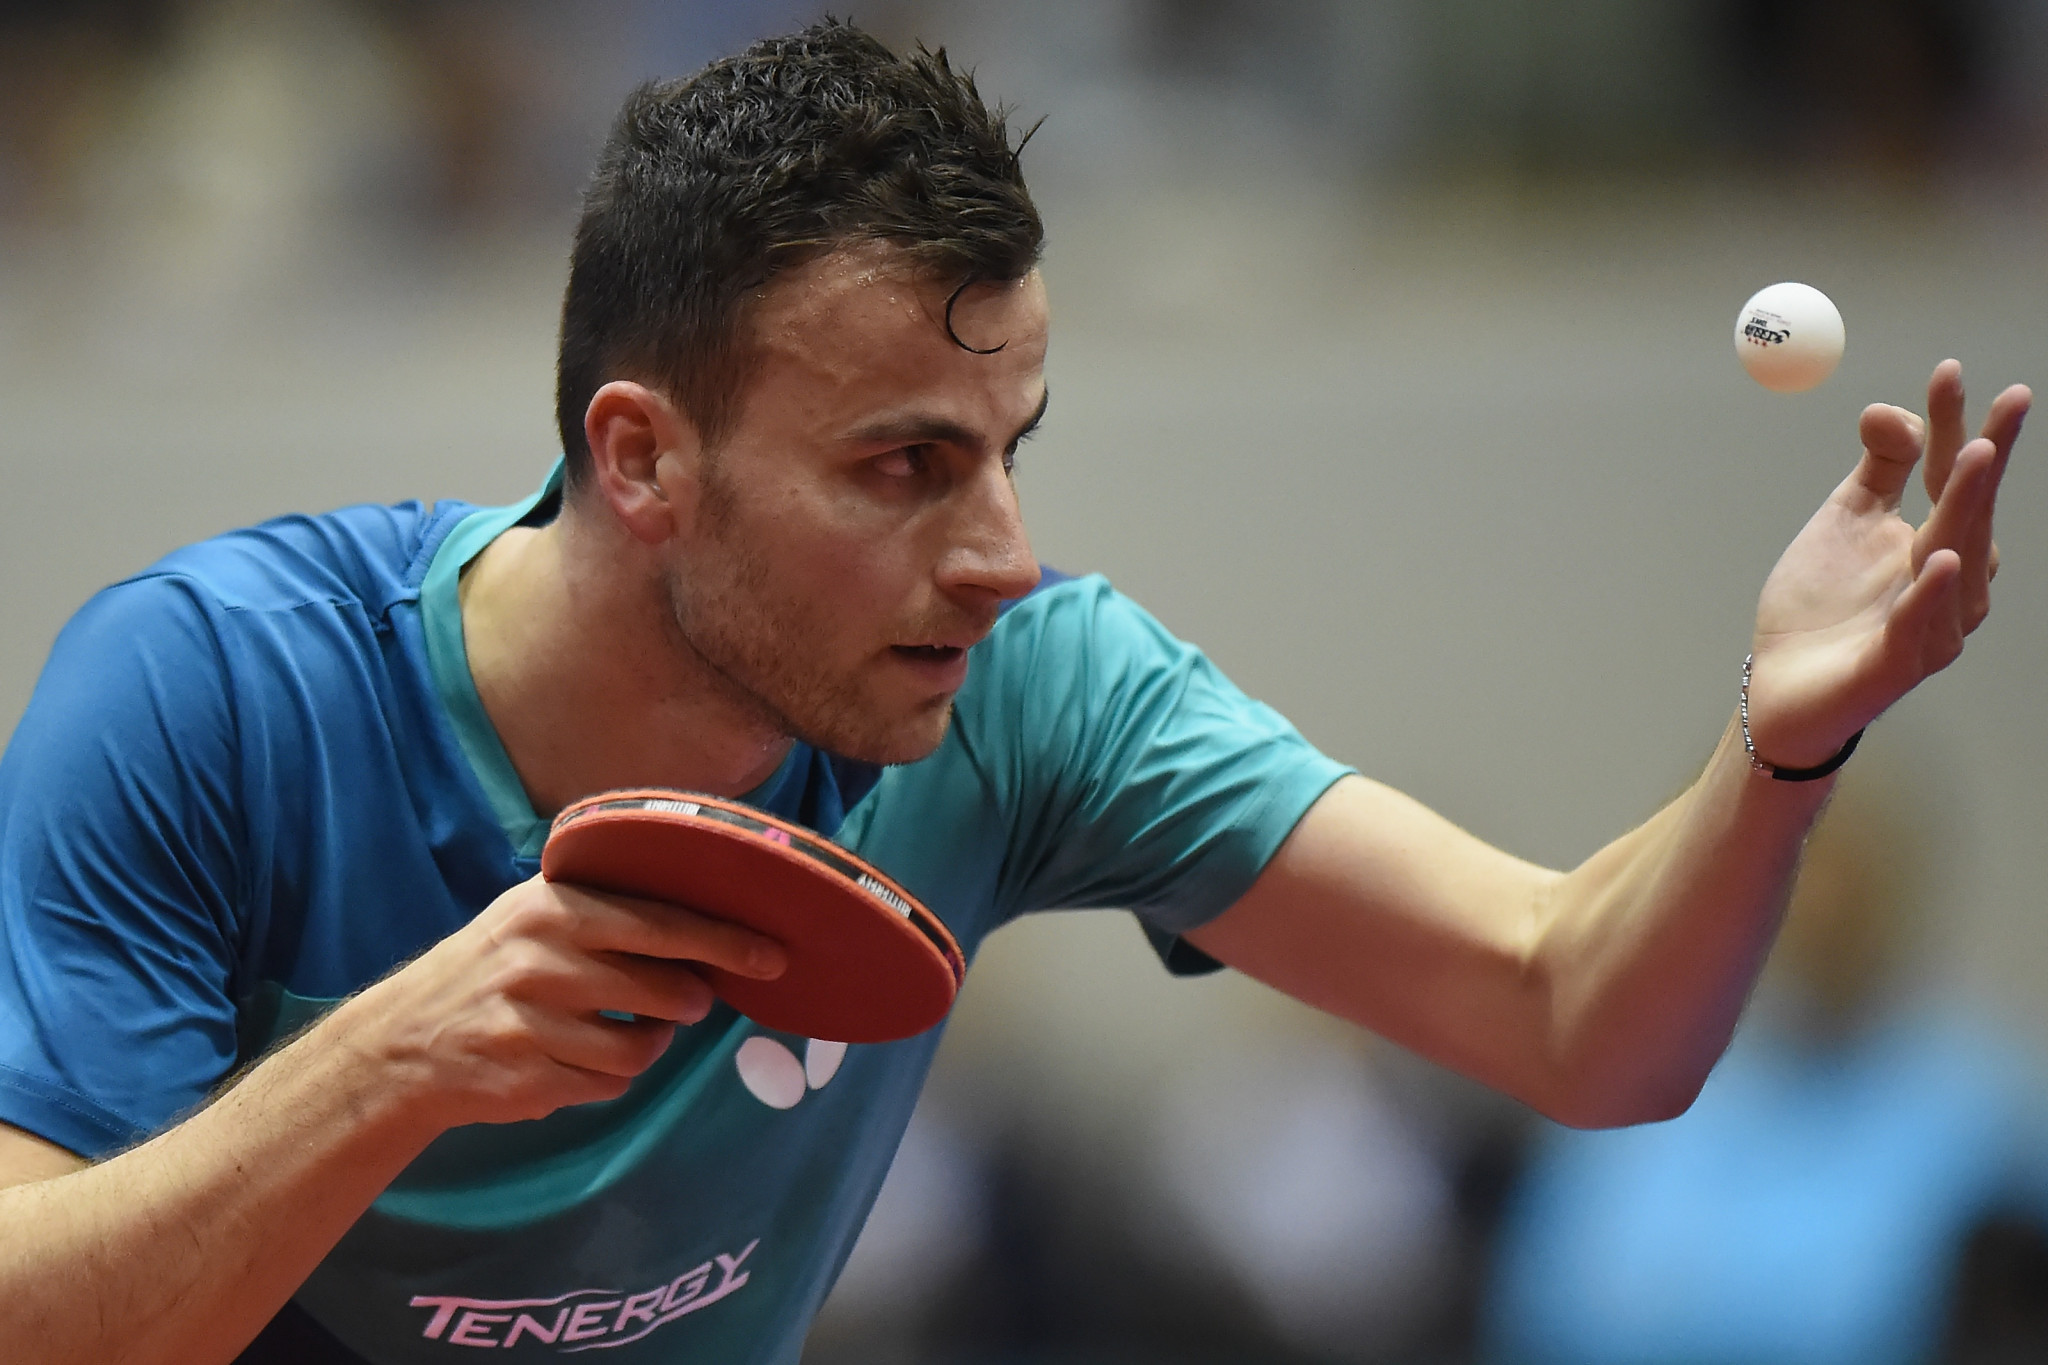 Home favourite causes upset as qualifying begins at ITTF Australian Open 